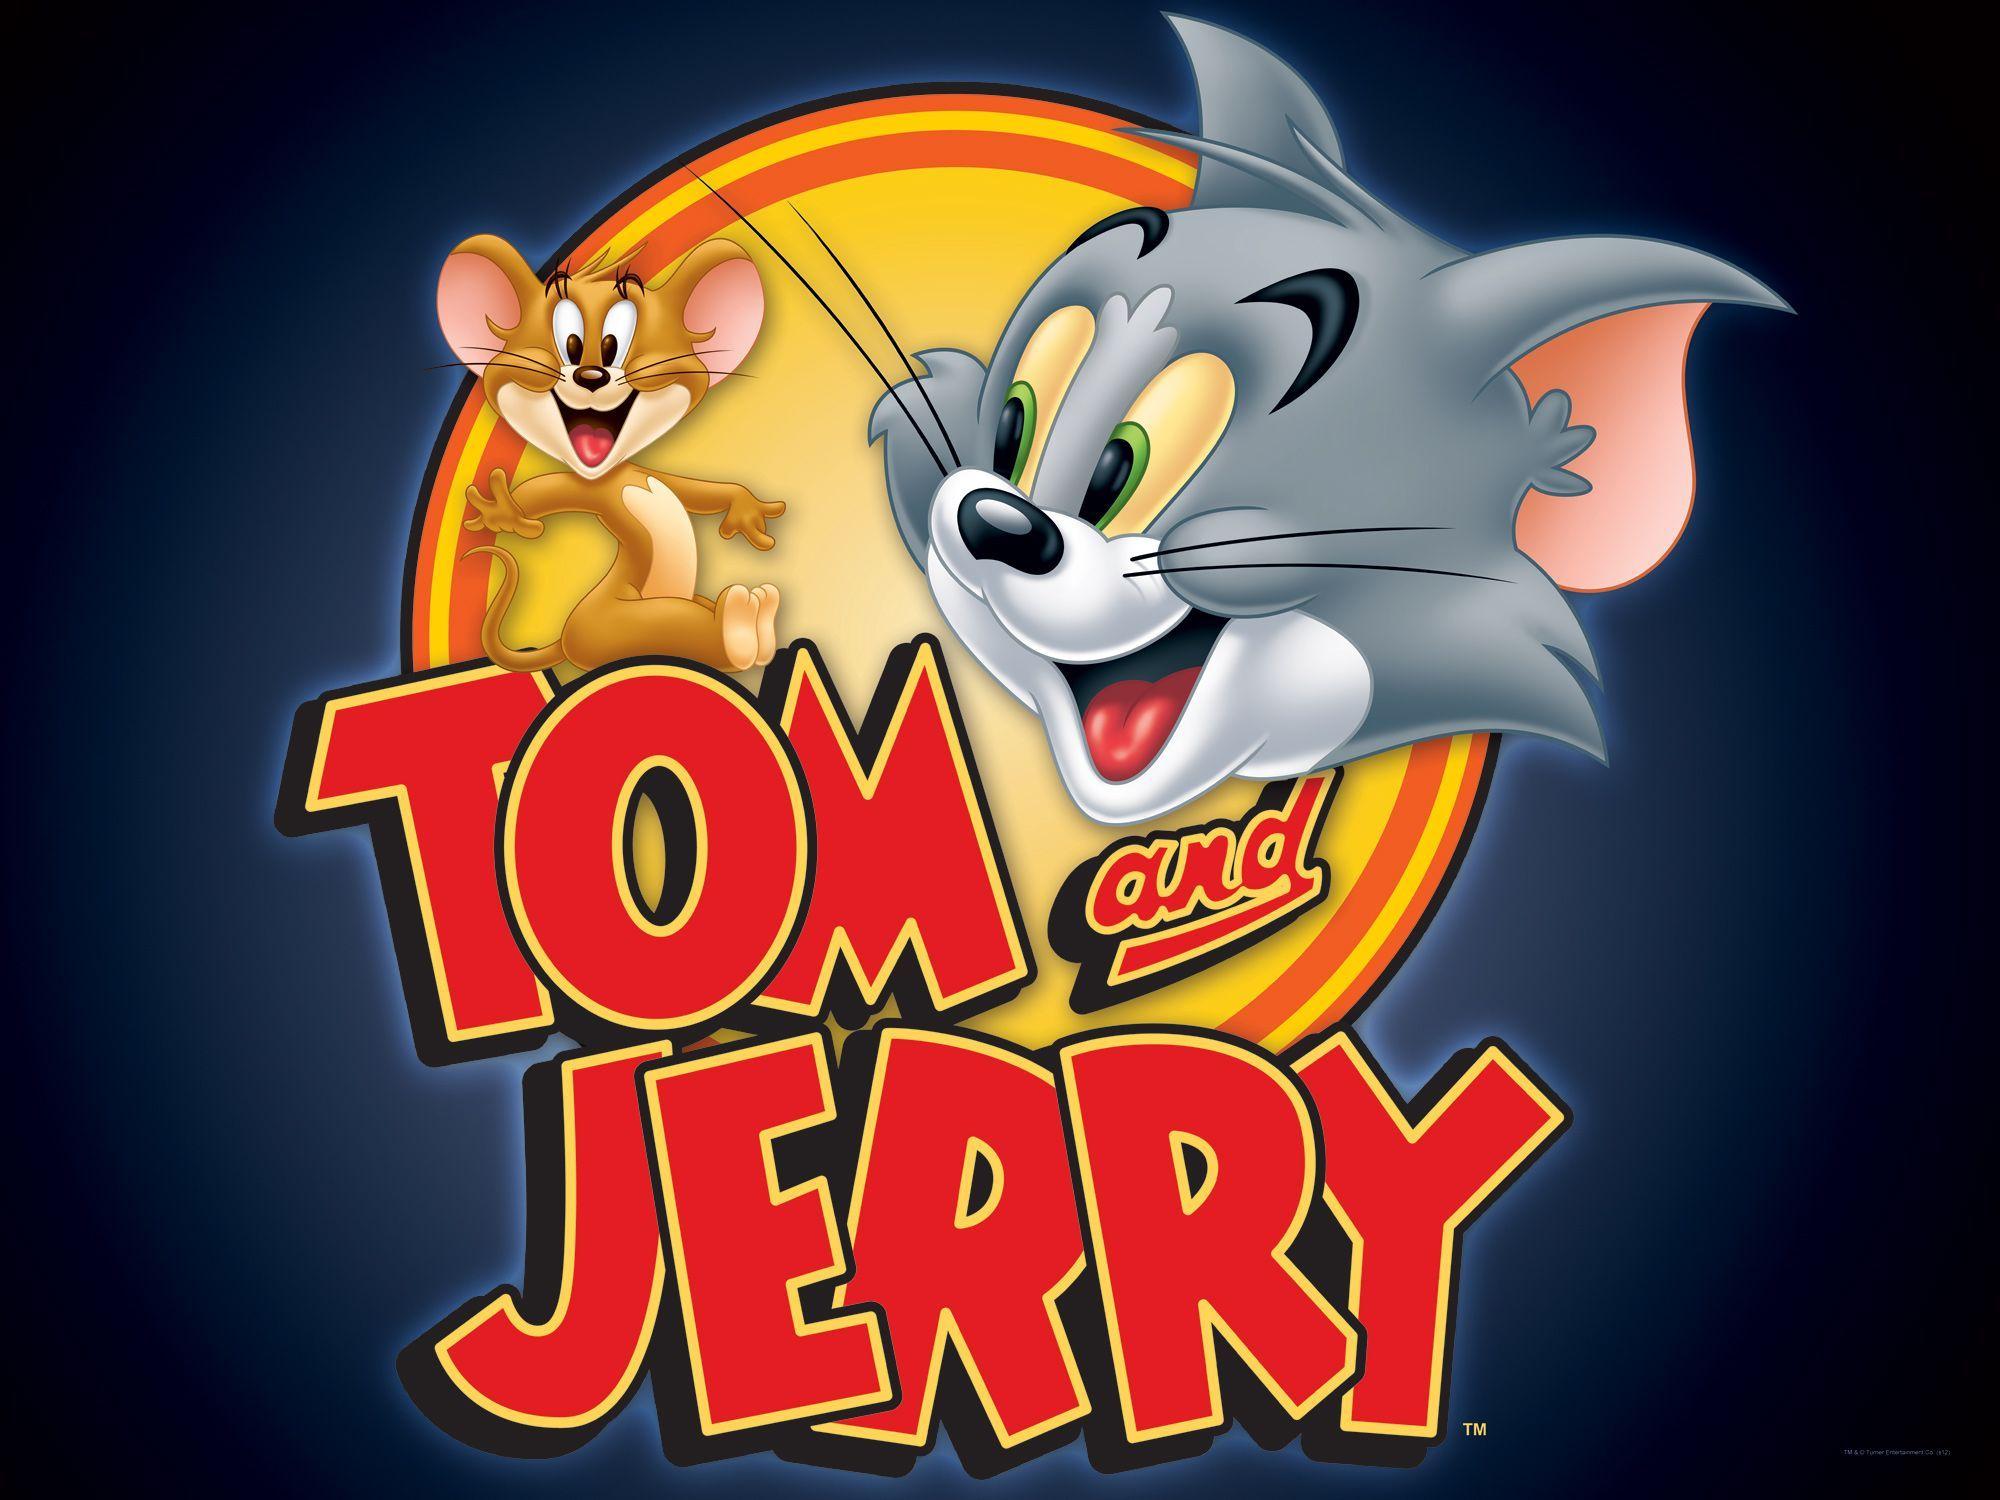 Tom and Jerry Logo - tom and jerry logo HD wallpaper. my interests. Tom